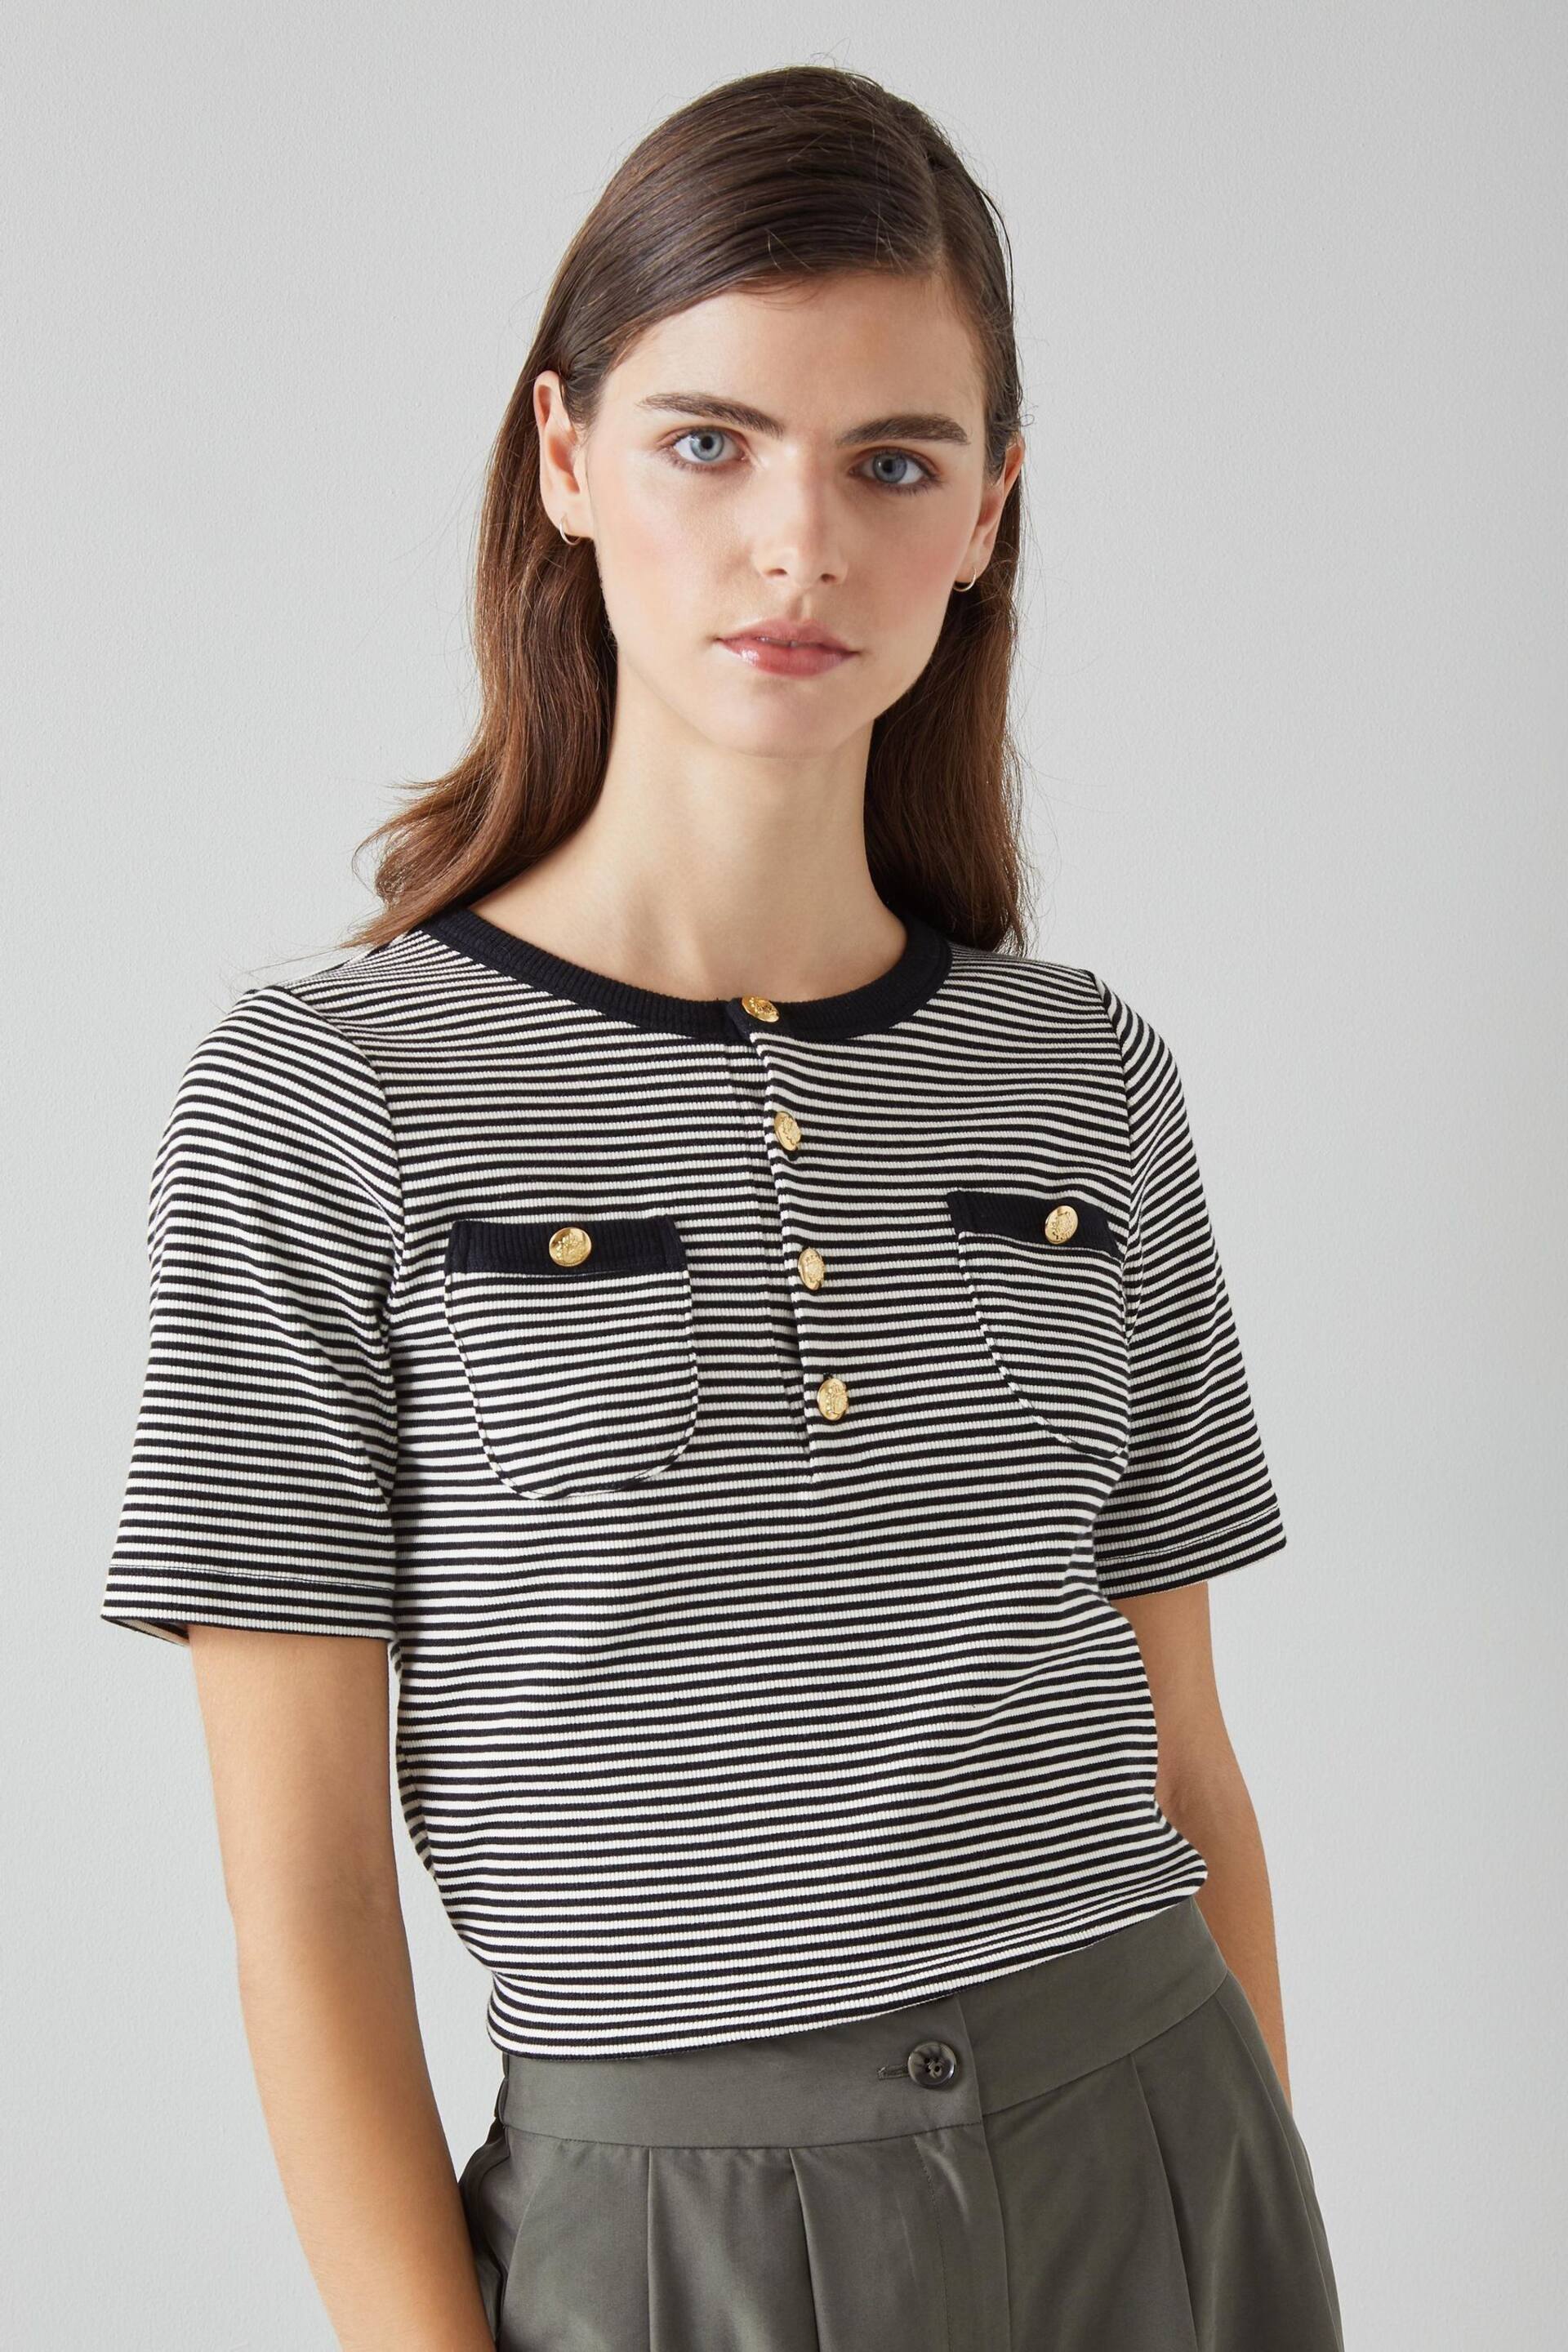 LK Bennett Charlie And Striped T-Shirt - Image 3 of 3